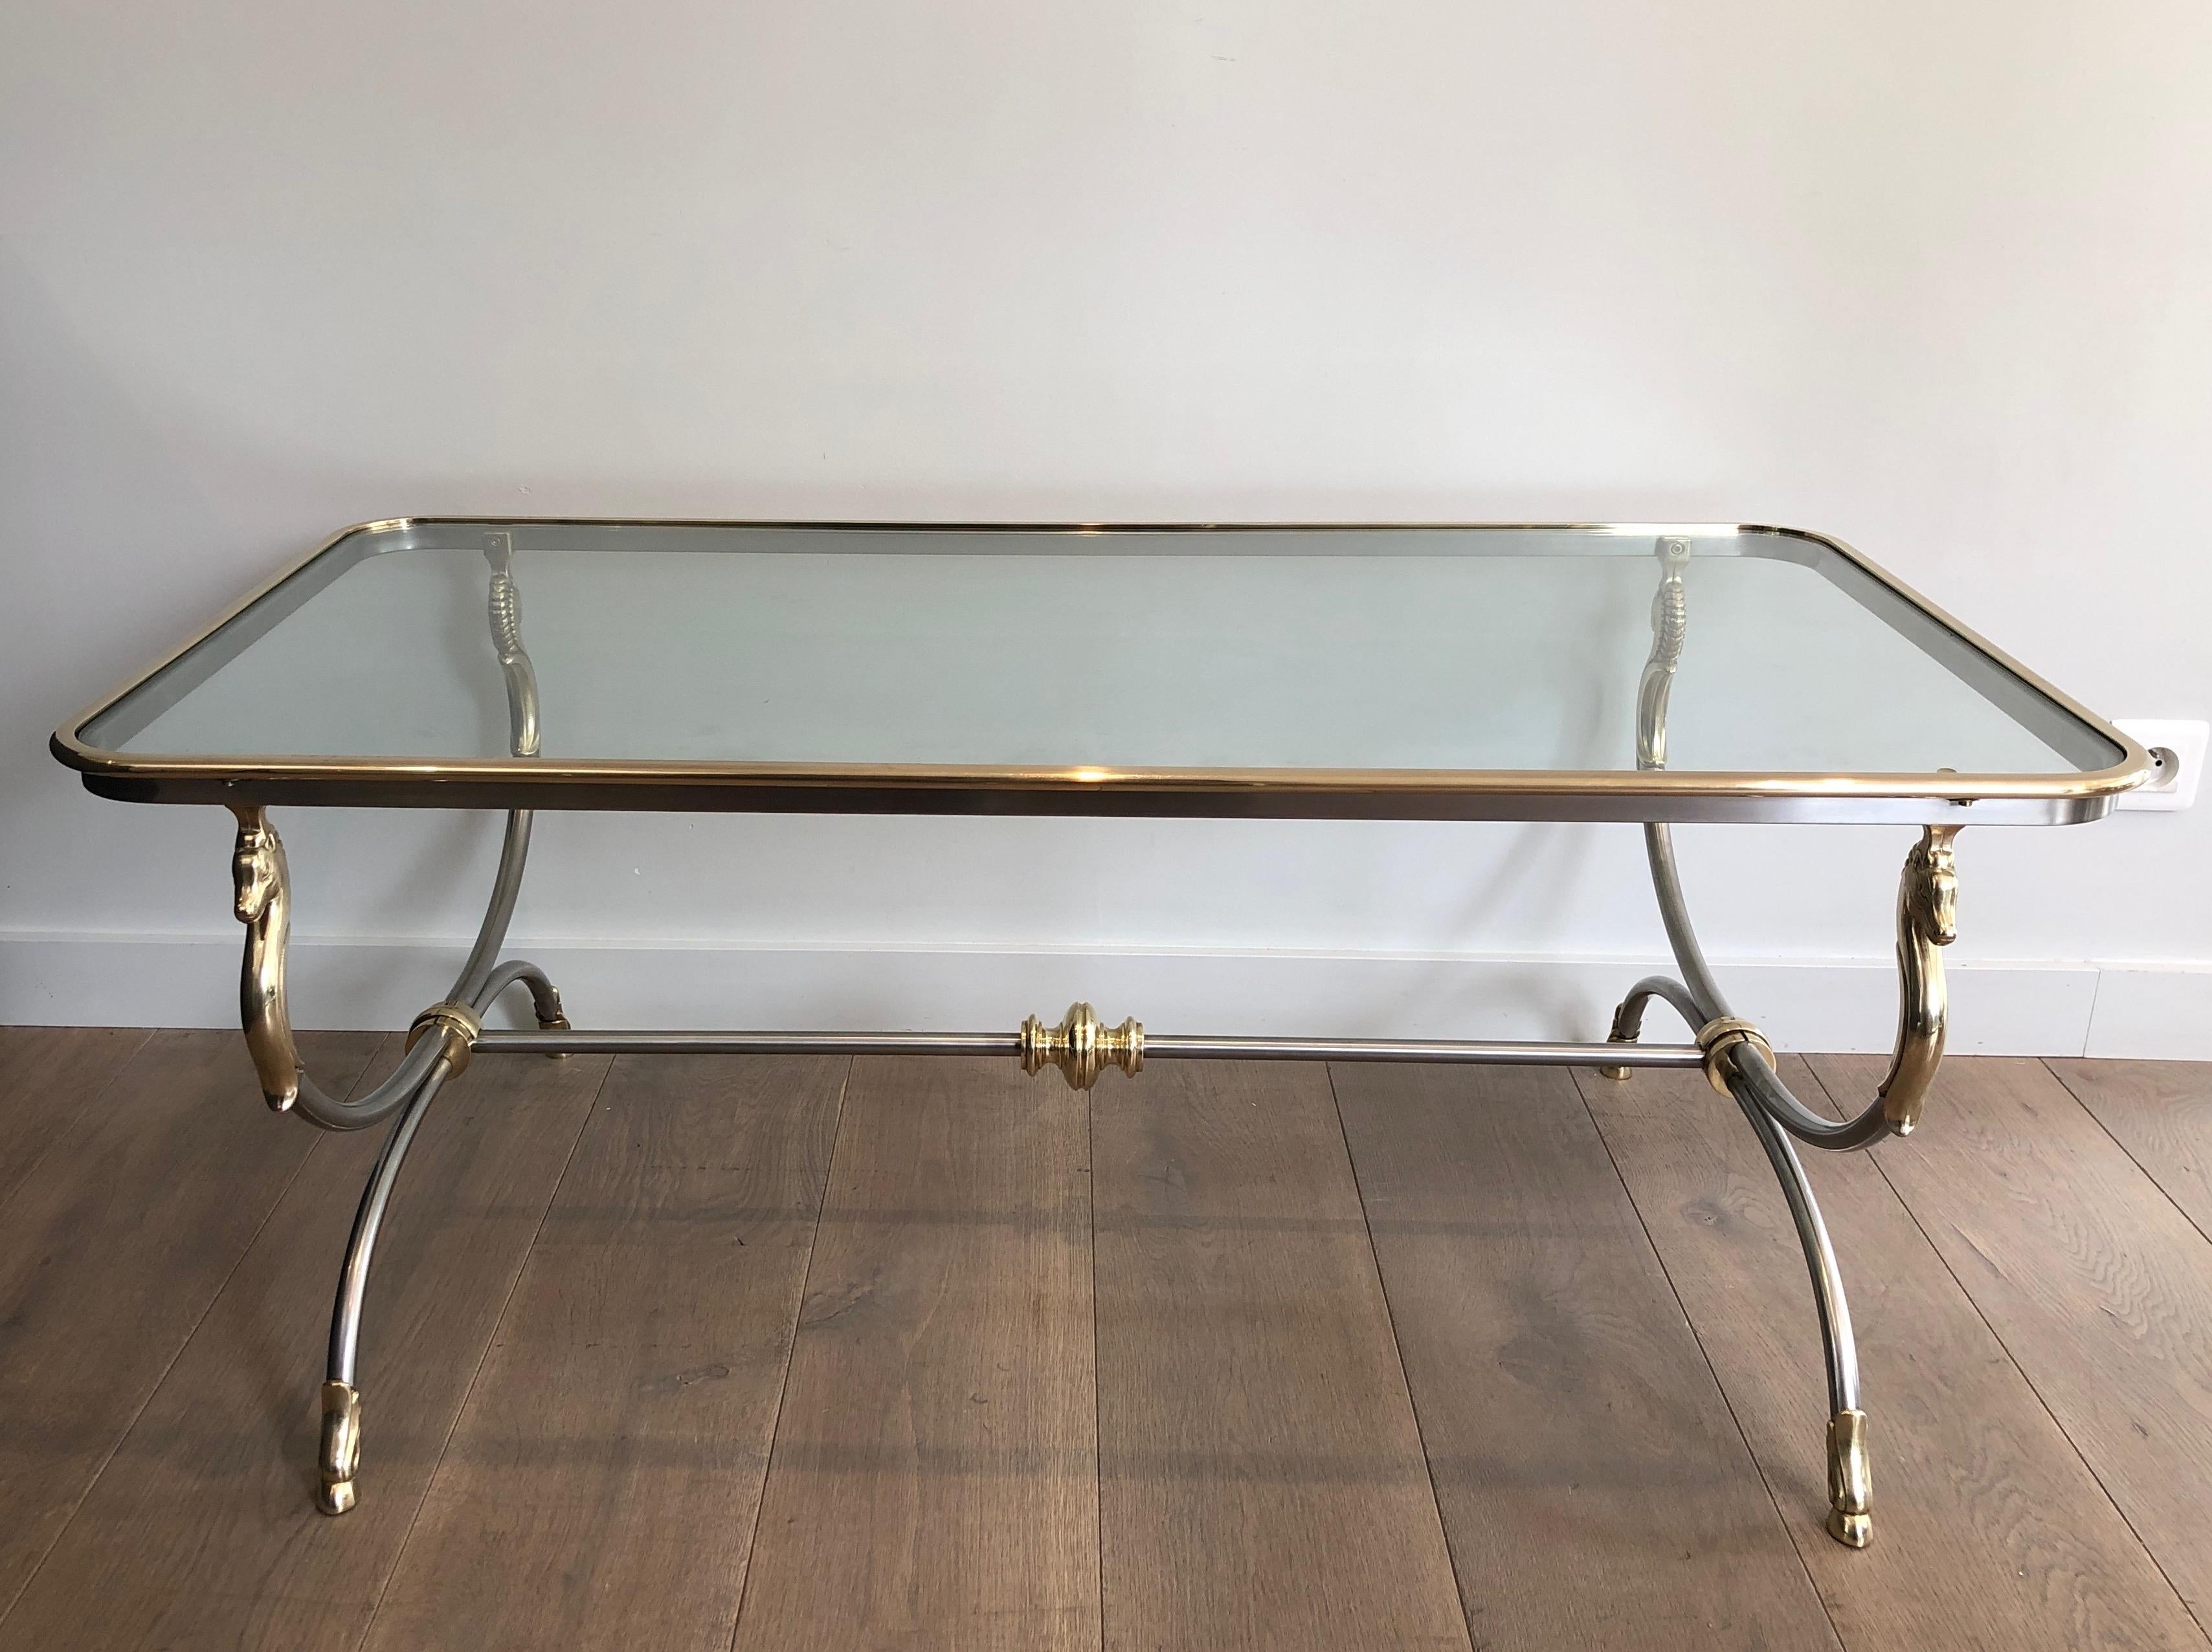 Neoclassical In the style of Maison Jansen. Large Brushed Steel and Brass Coffee Table